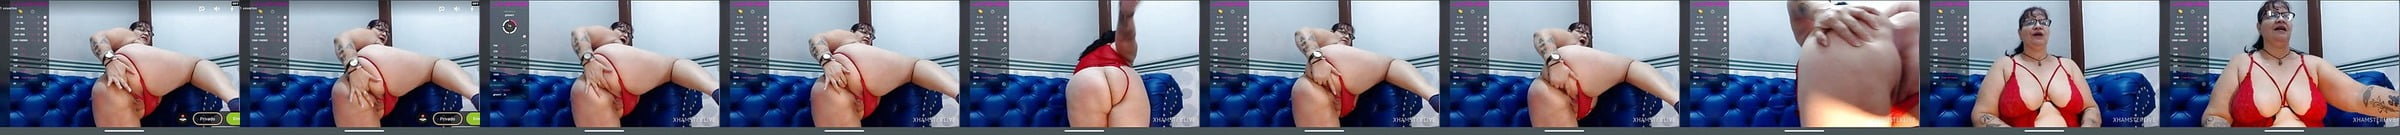 Featured Moomay Shows Pussy And Ass Porn Videos Xhamster